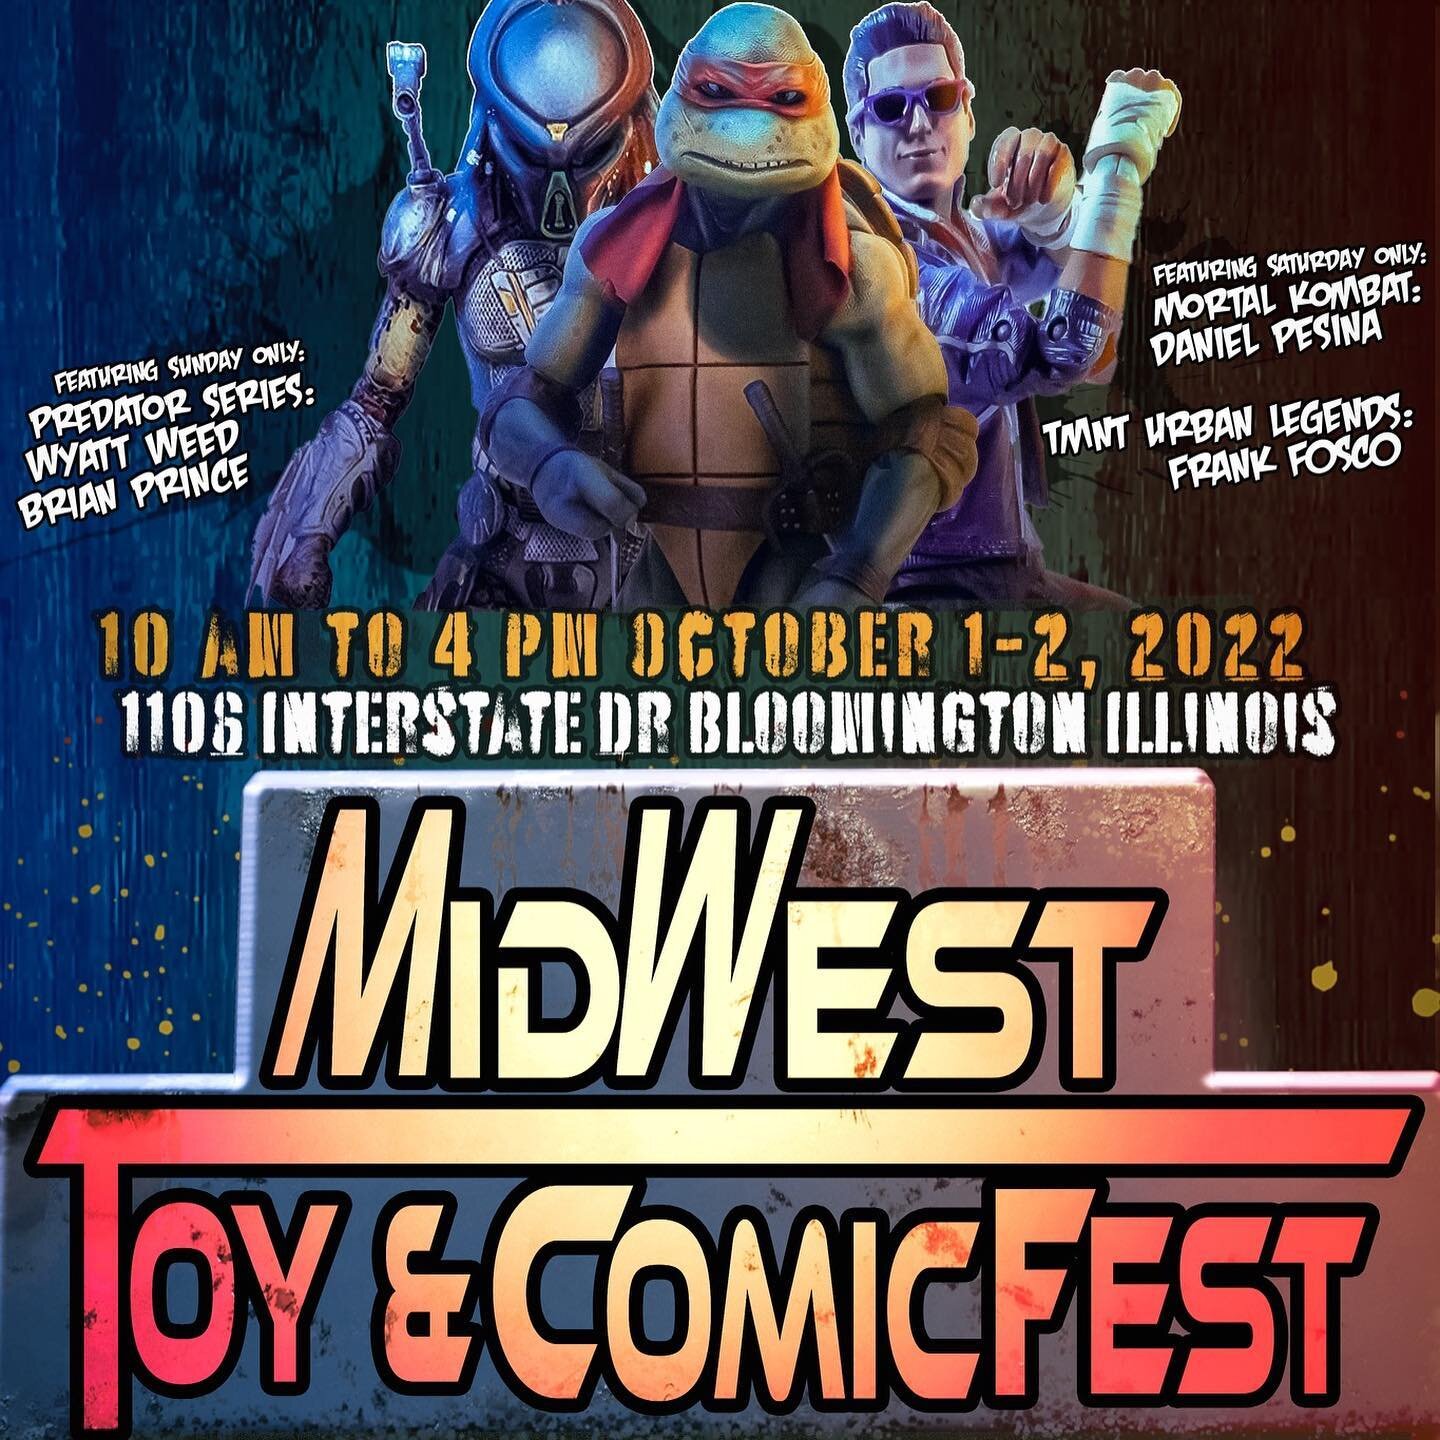 Hey Illinois!!!

I wanted to give a reminder that I&rsquo;ll be a guest at the MIDWEST COMIC &amp; TOY FEST!

I&rsquo;m going to be attending alongside Wyatt Weed from Predator 2!!!

Place: 1106 Interstate Dr., Bloomington, Illinois
Date: Sunday, Oct